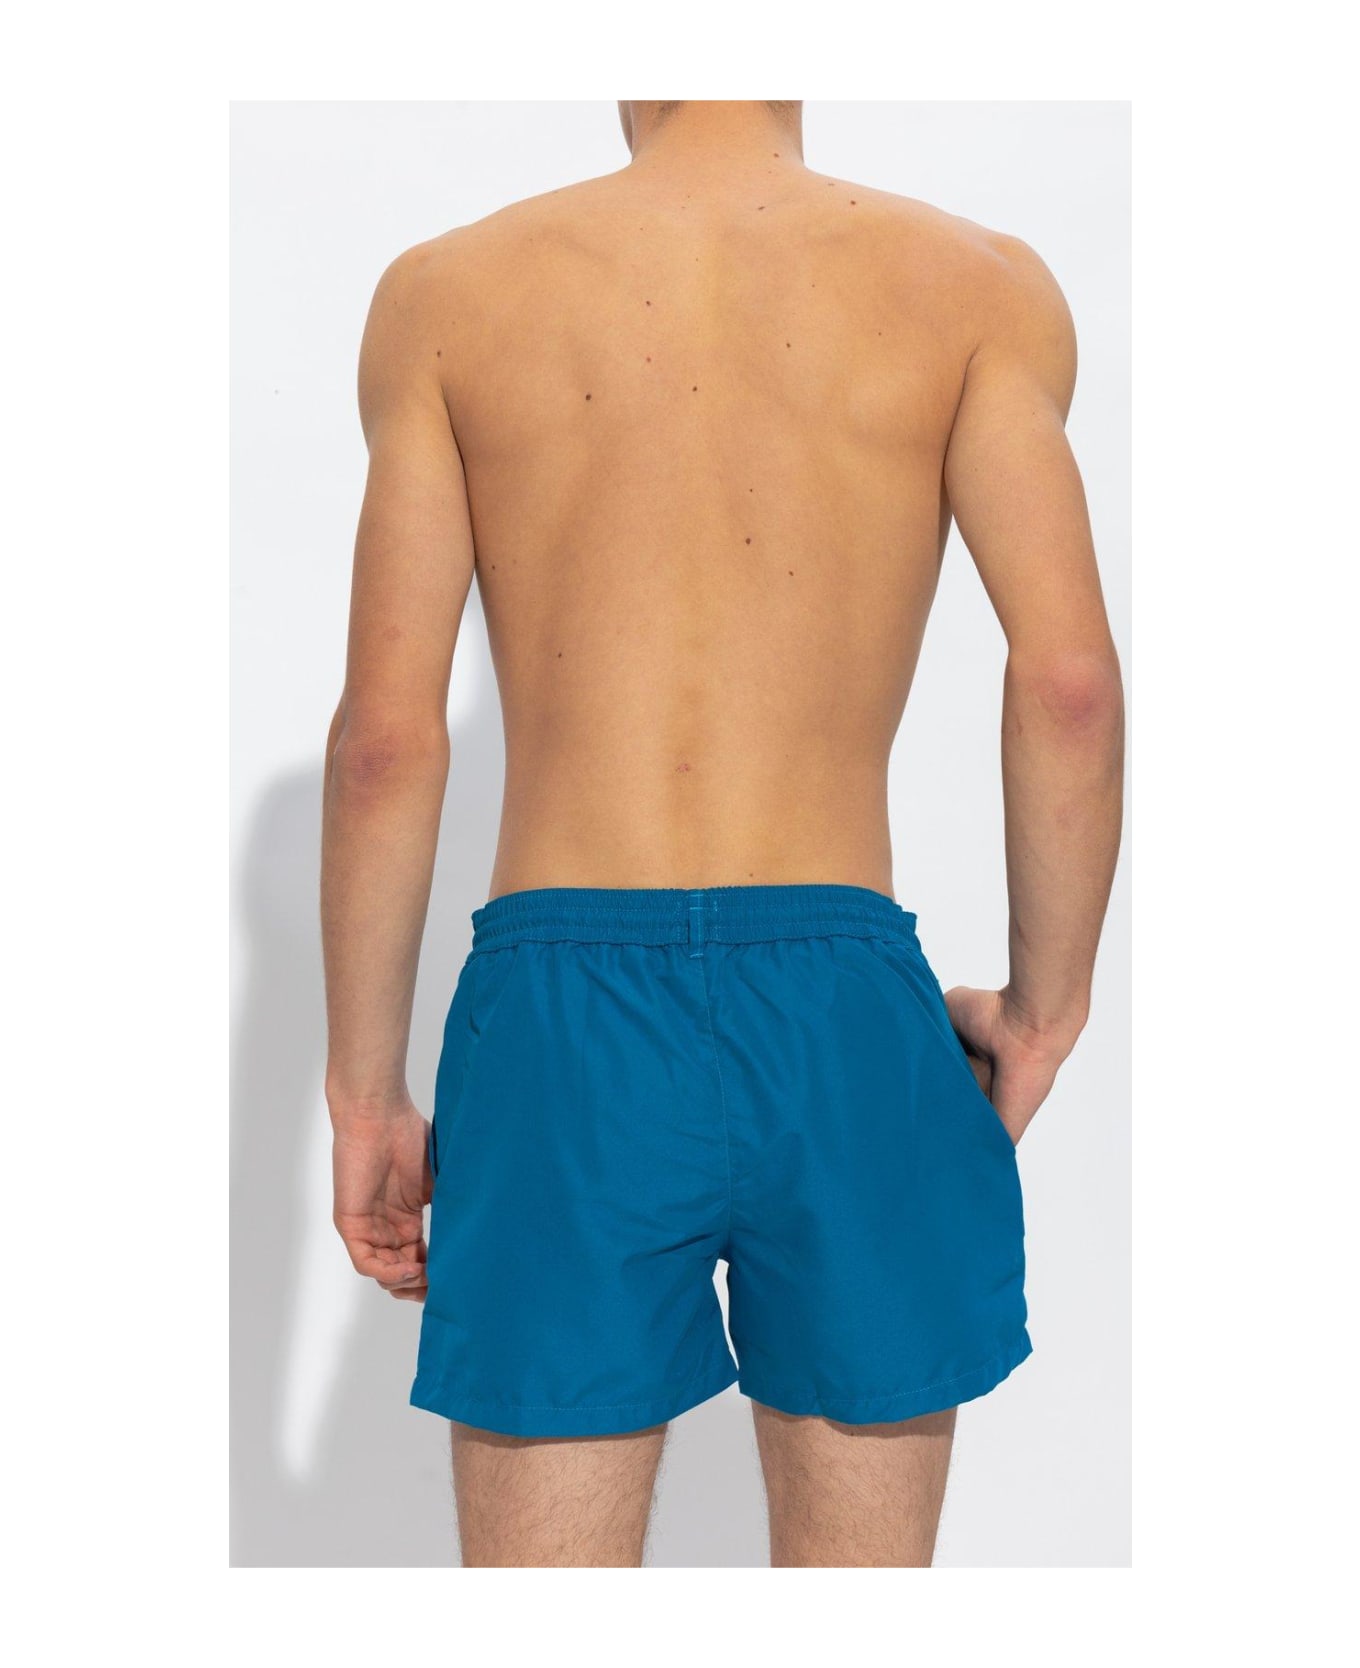 Paul Smith Swimming Shorts With Patch - Blue 水着